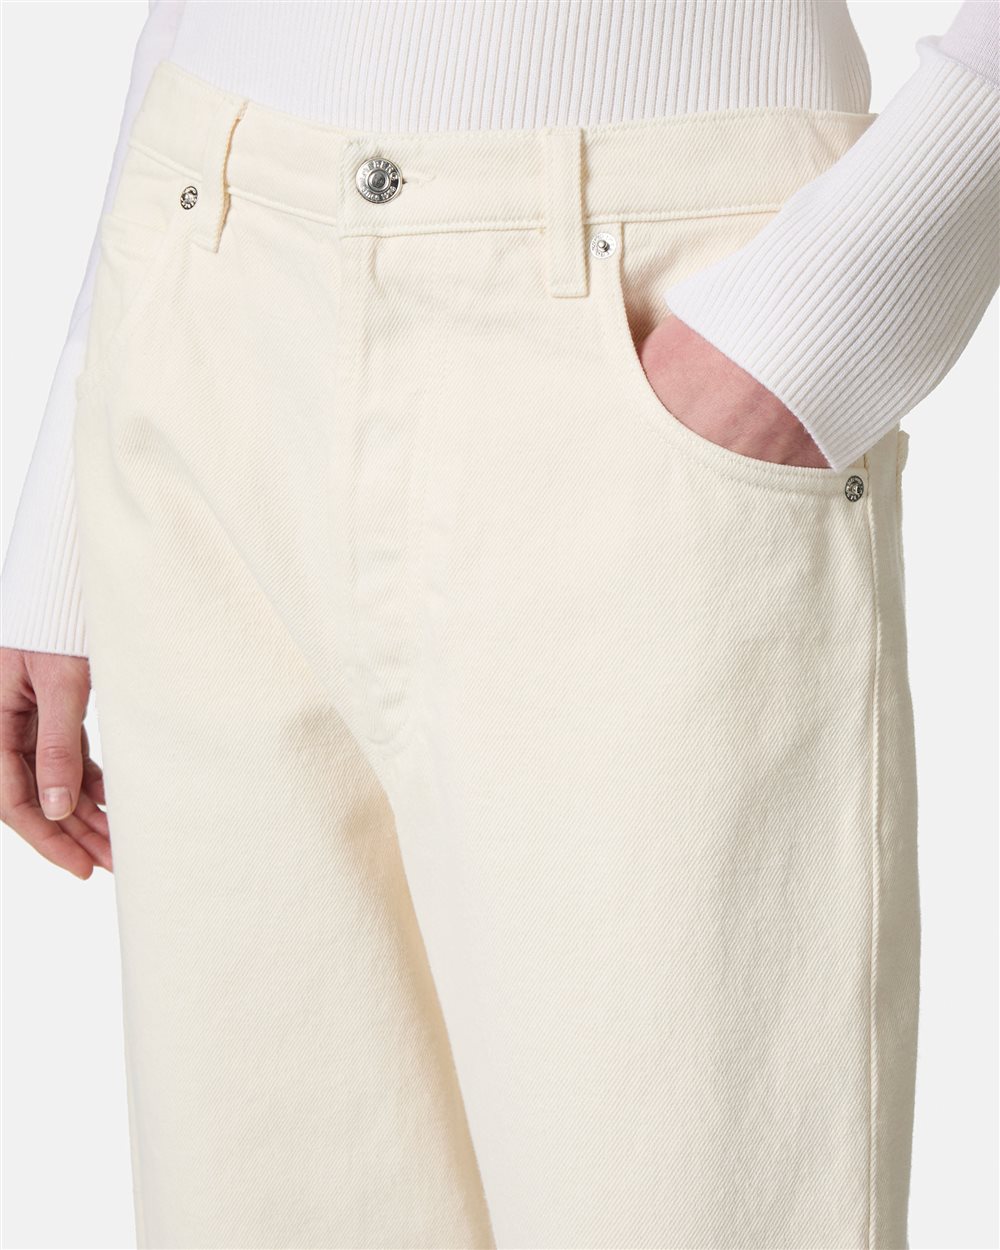 Ivory white jeans with logo - Iceberg - Official Website